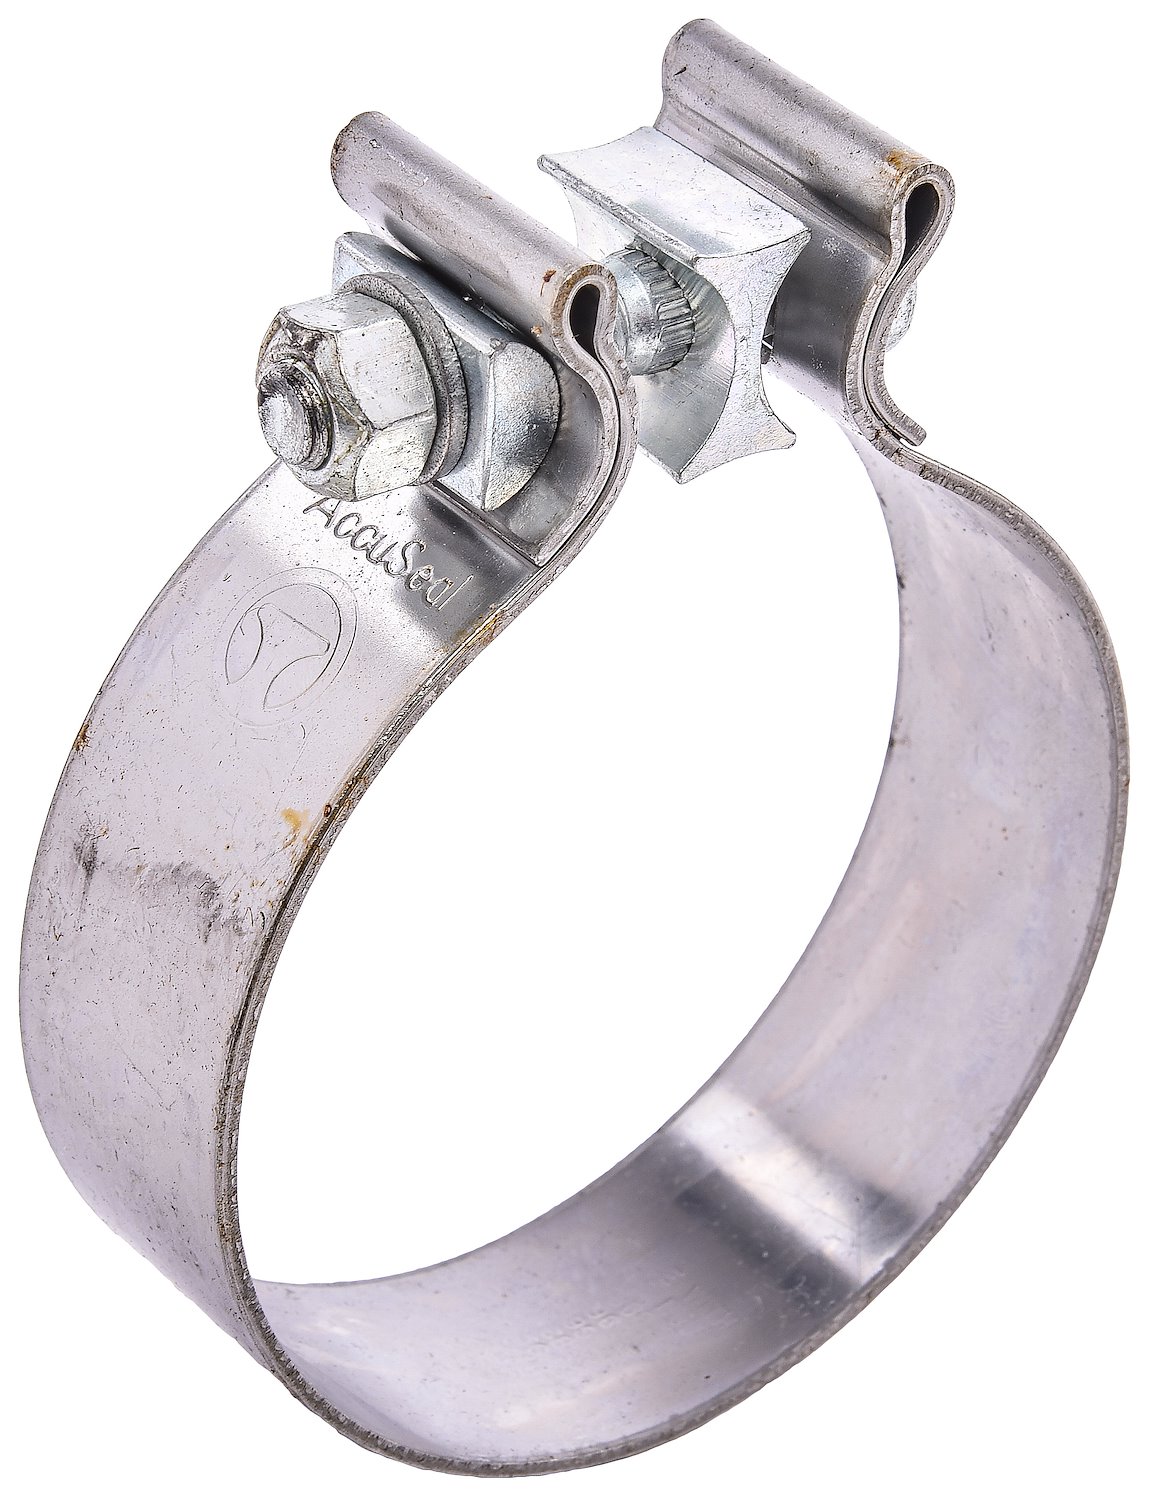 Narrow Band Exhaust Clamp 3.5" ID x 1-1/4" wide